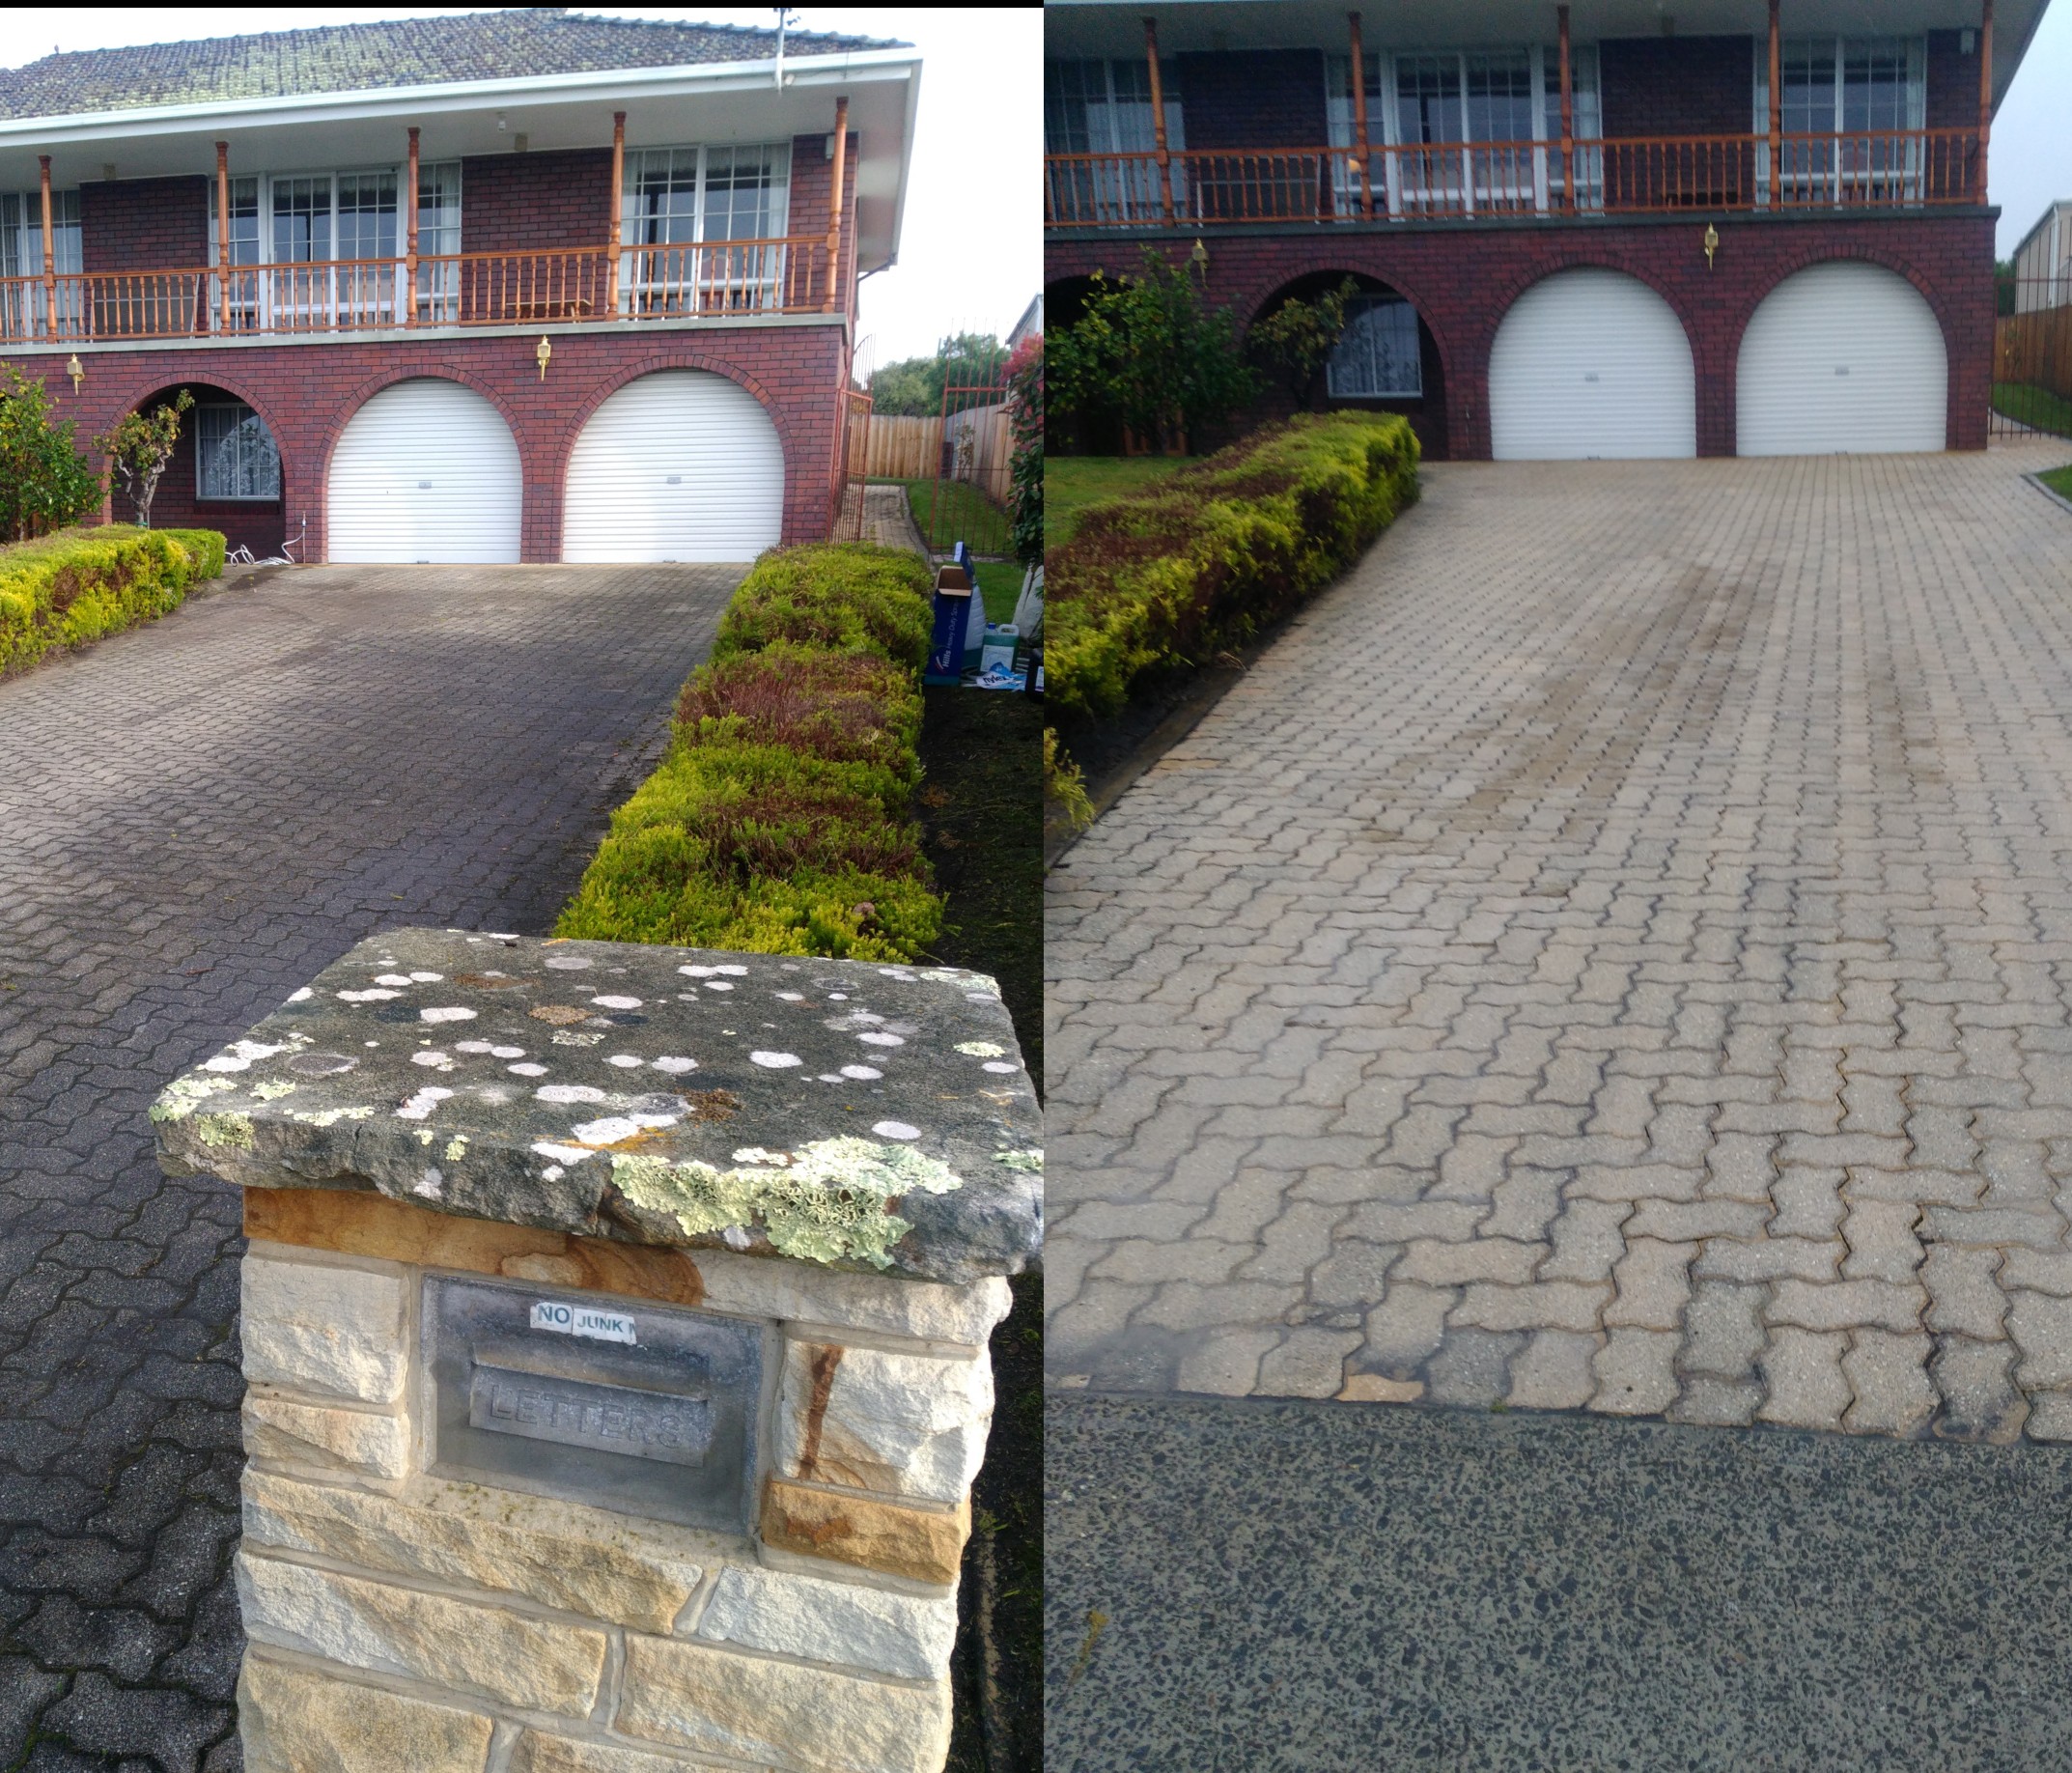 355021461836300-pavers-dirty-clean-scaled.jpg